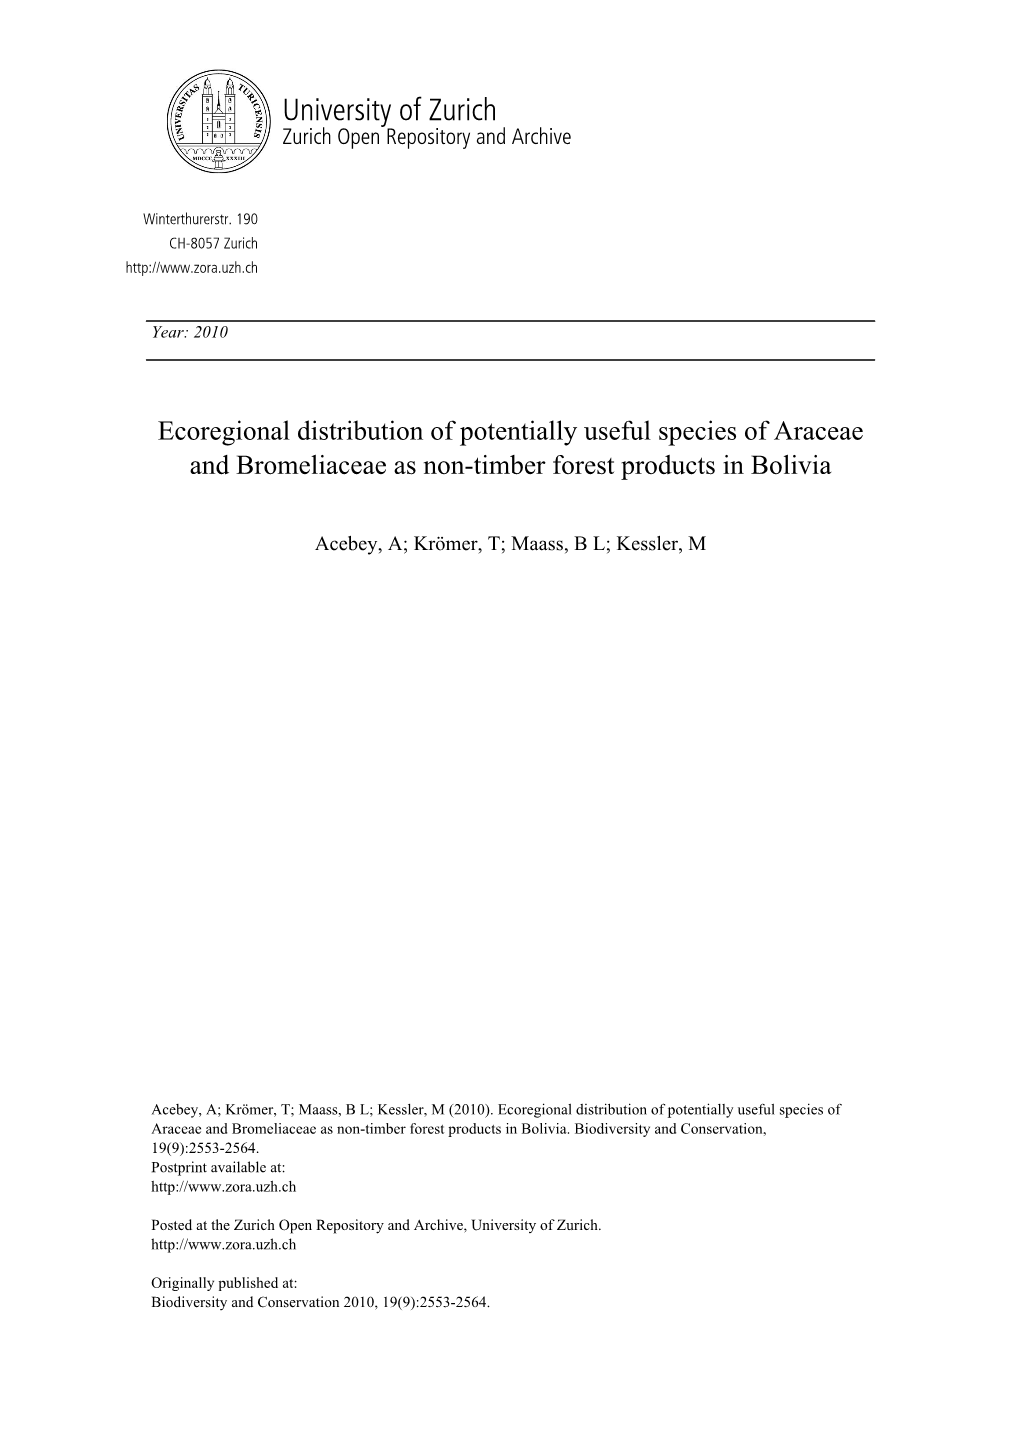 Ecoregional Distribution of Potentially Useful Species of Araceae and Bromeliaceae As Non-Timber Forest Products in Bolivia